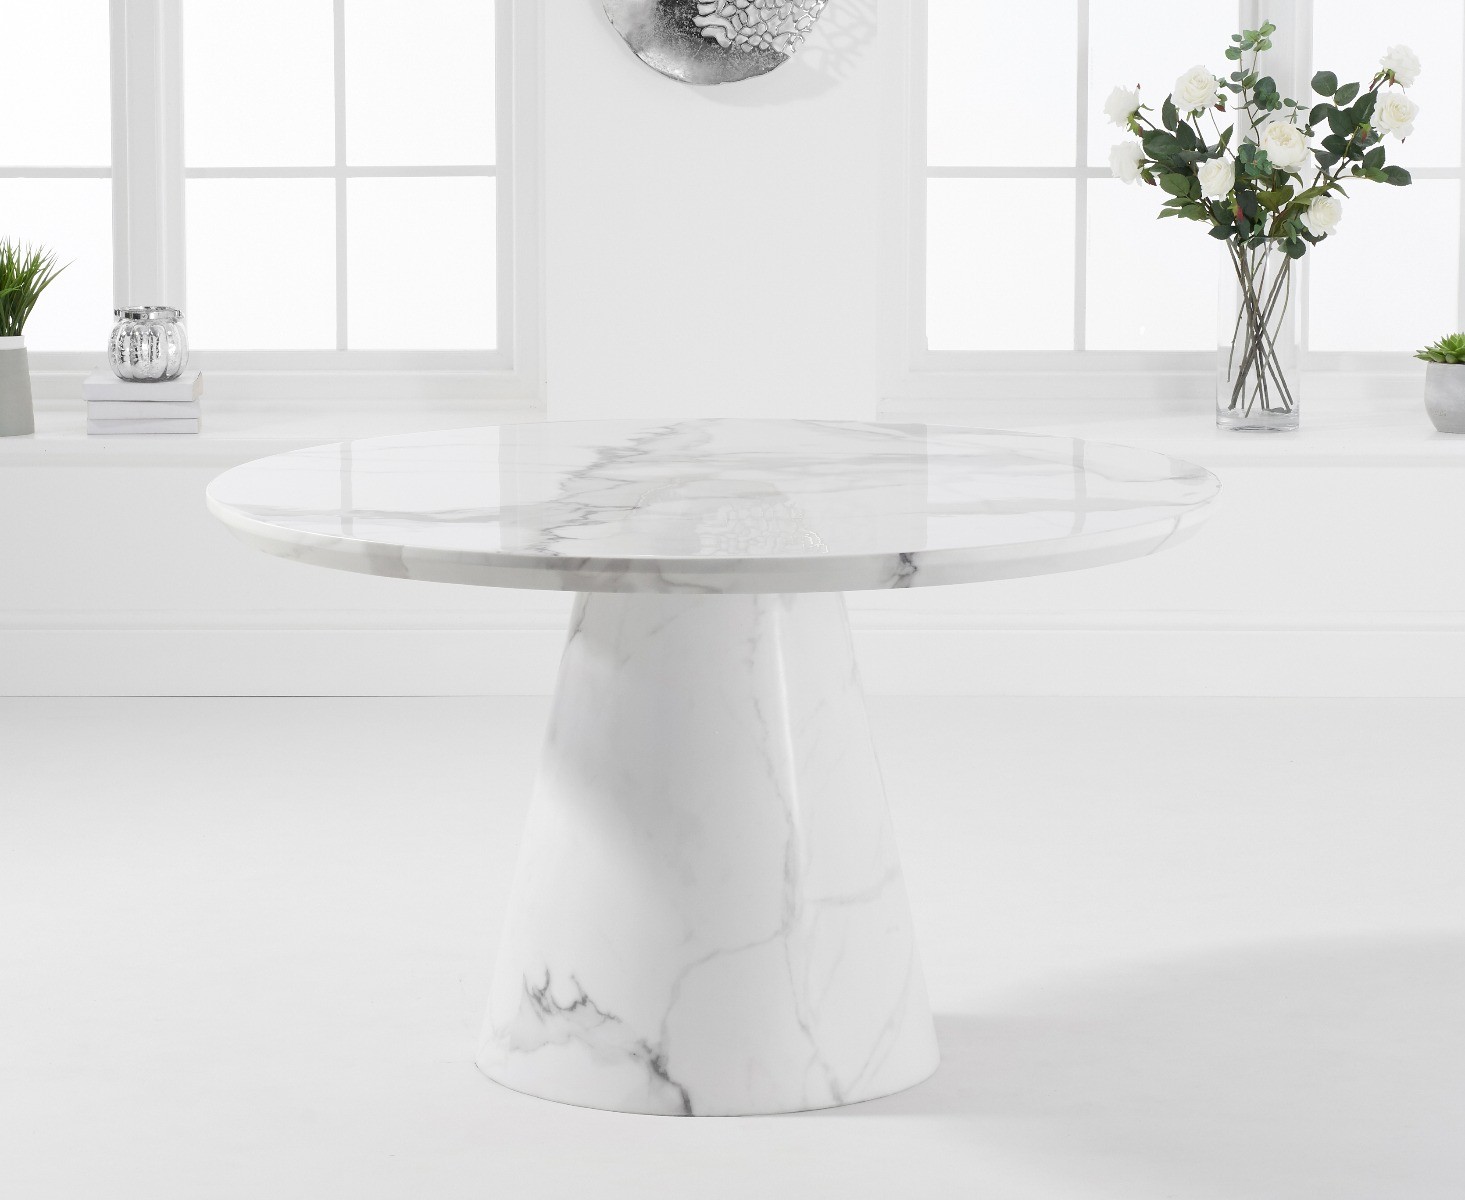 Photo 1 of Ravello 130cm round white marble dining table with 6 grey aldo chairs